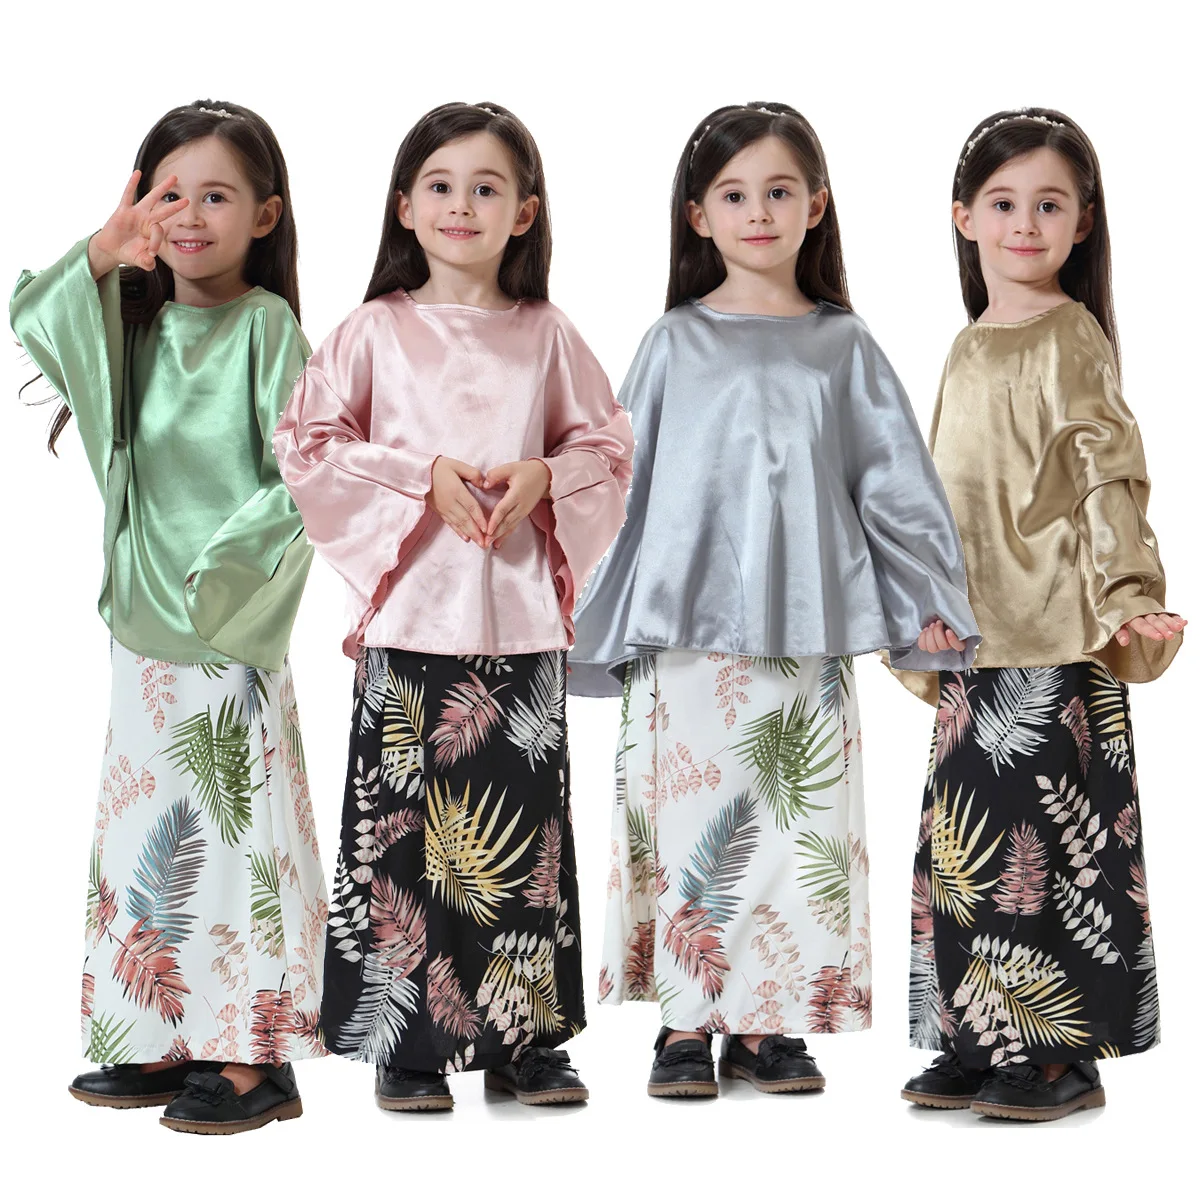 Fashion traditional muslim kids clothes satin girls 2 piece sets islamic clothing, Gray,pink,brown,green